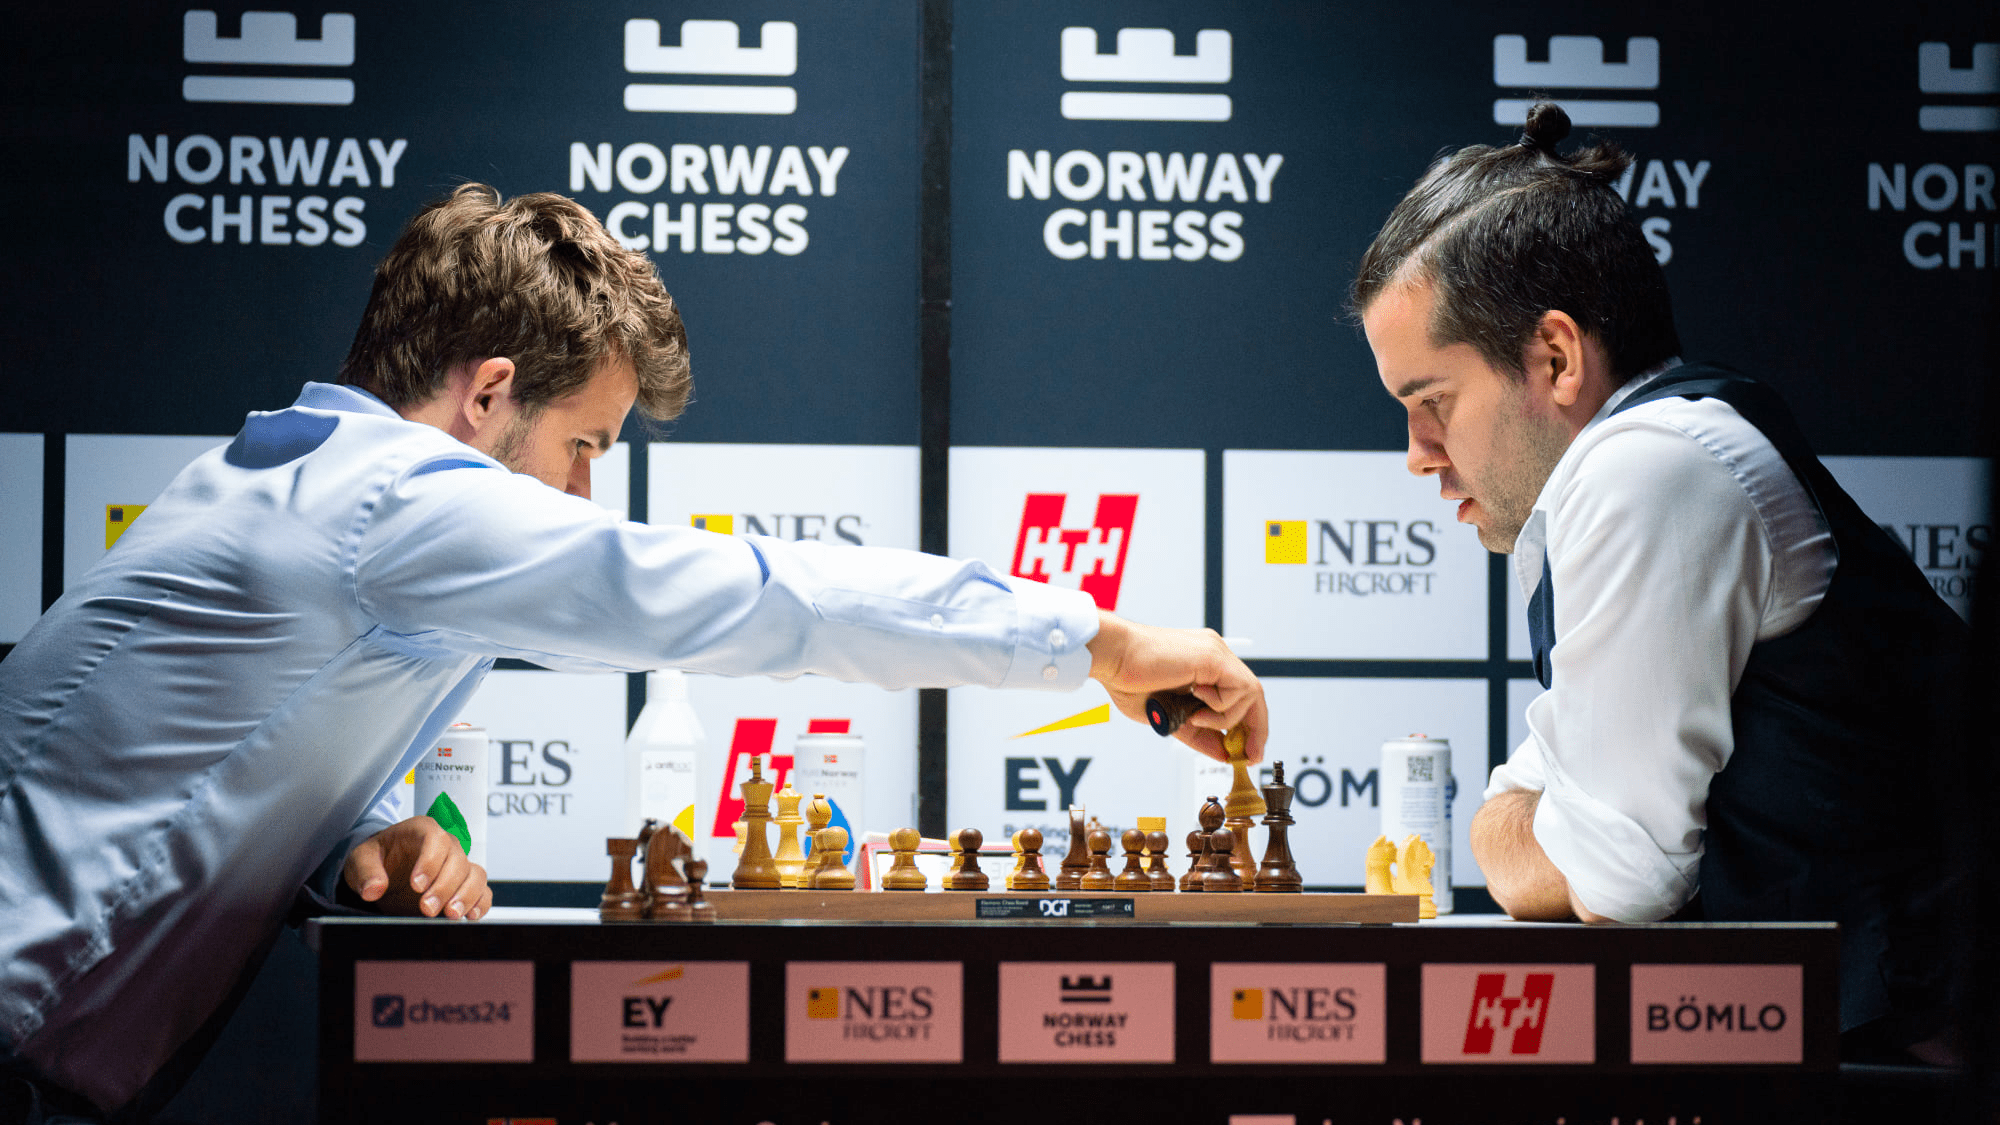 Norway Chess R4 Rapport Increases Lead, Carlsen "Tortures